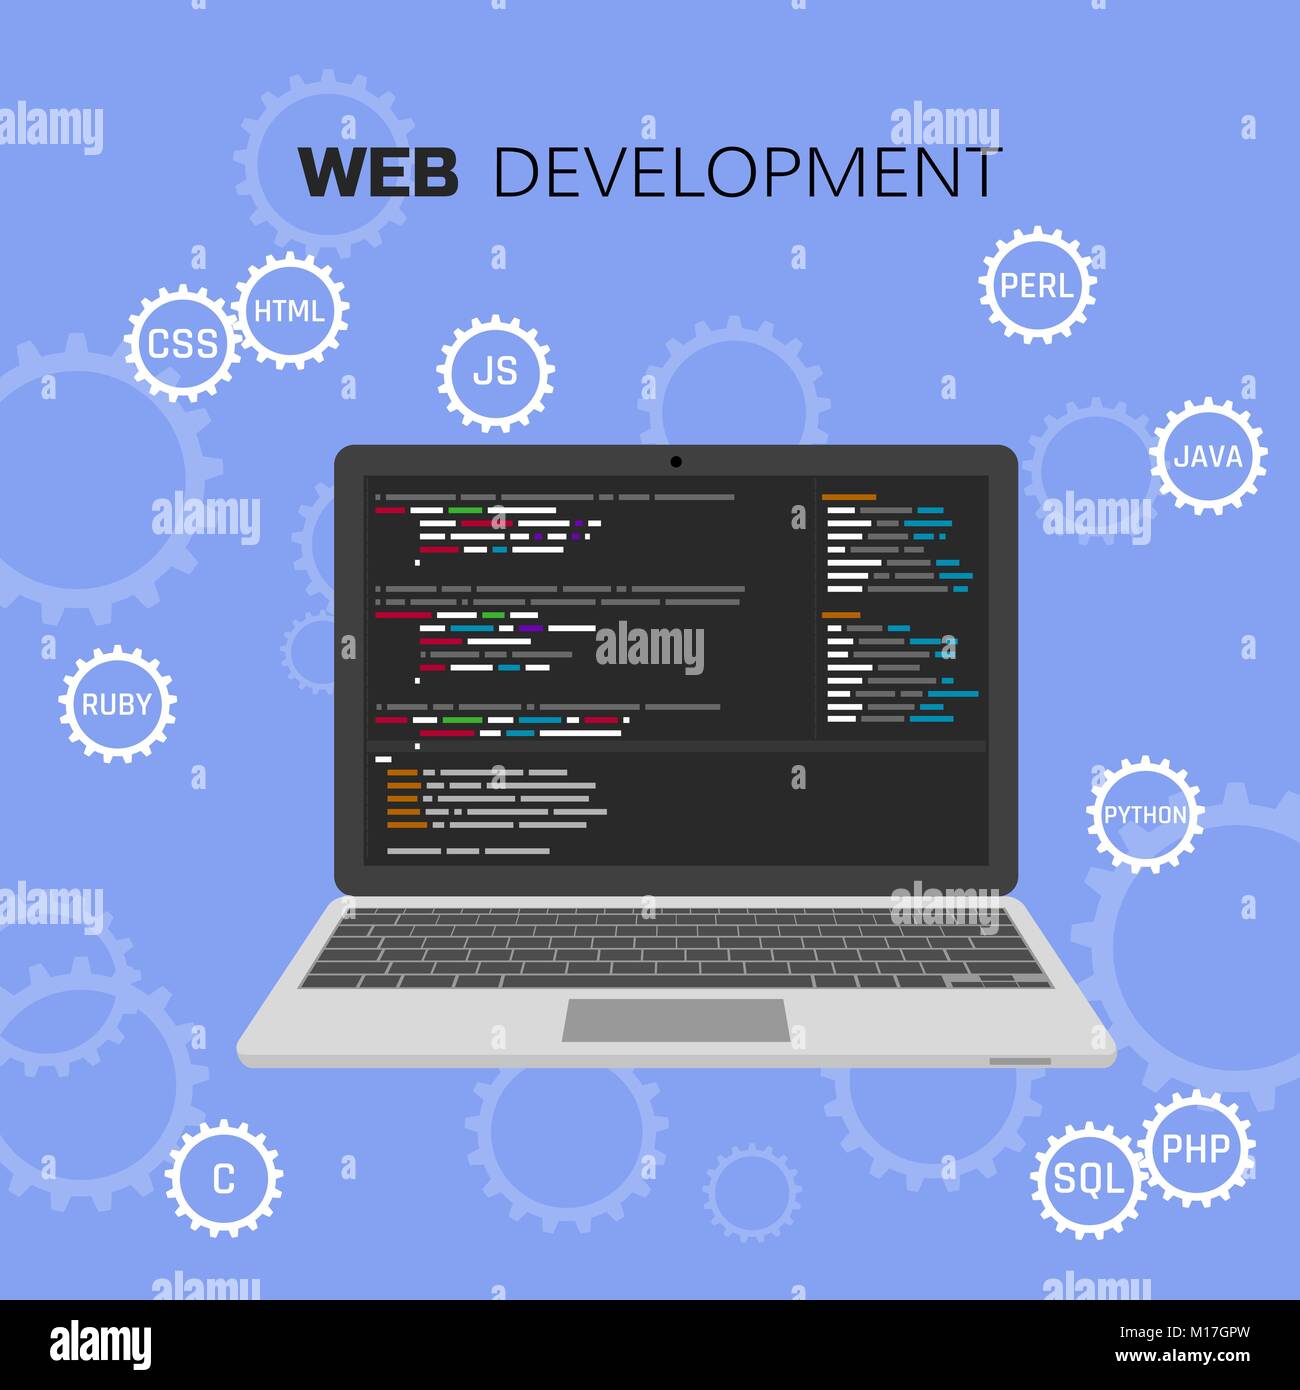 Web development infographic. Programming and coding concept. Vector illustration Stock Vector